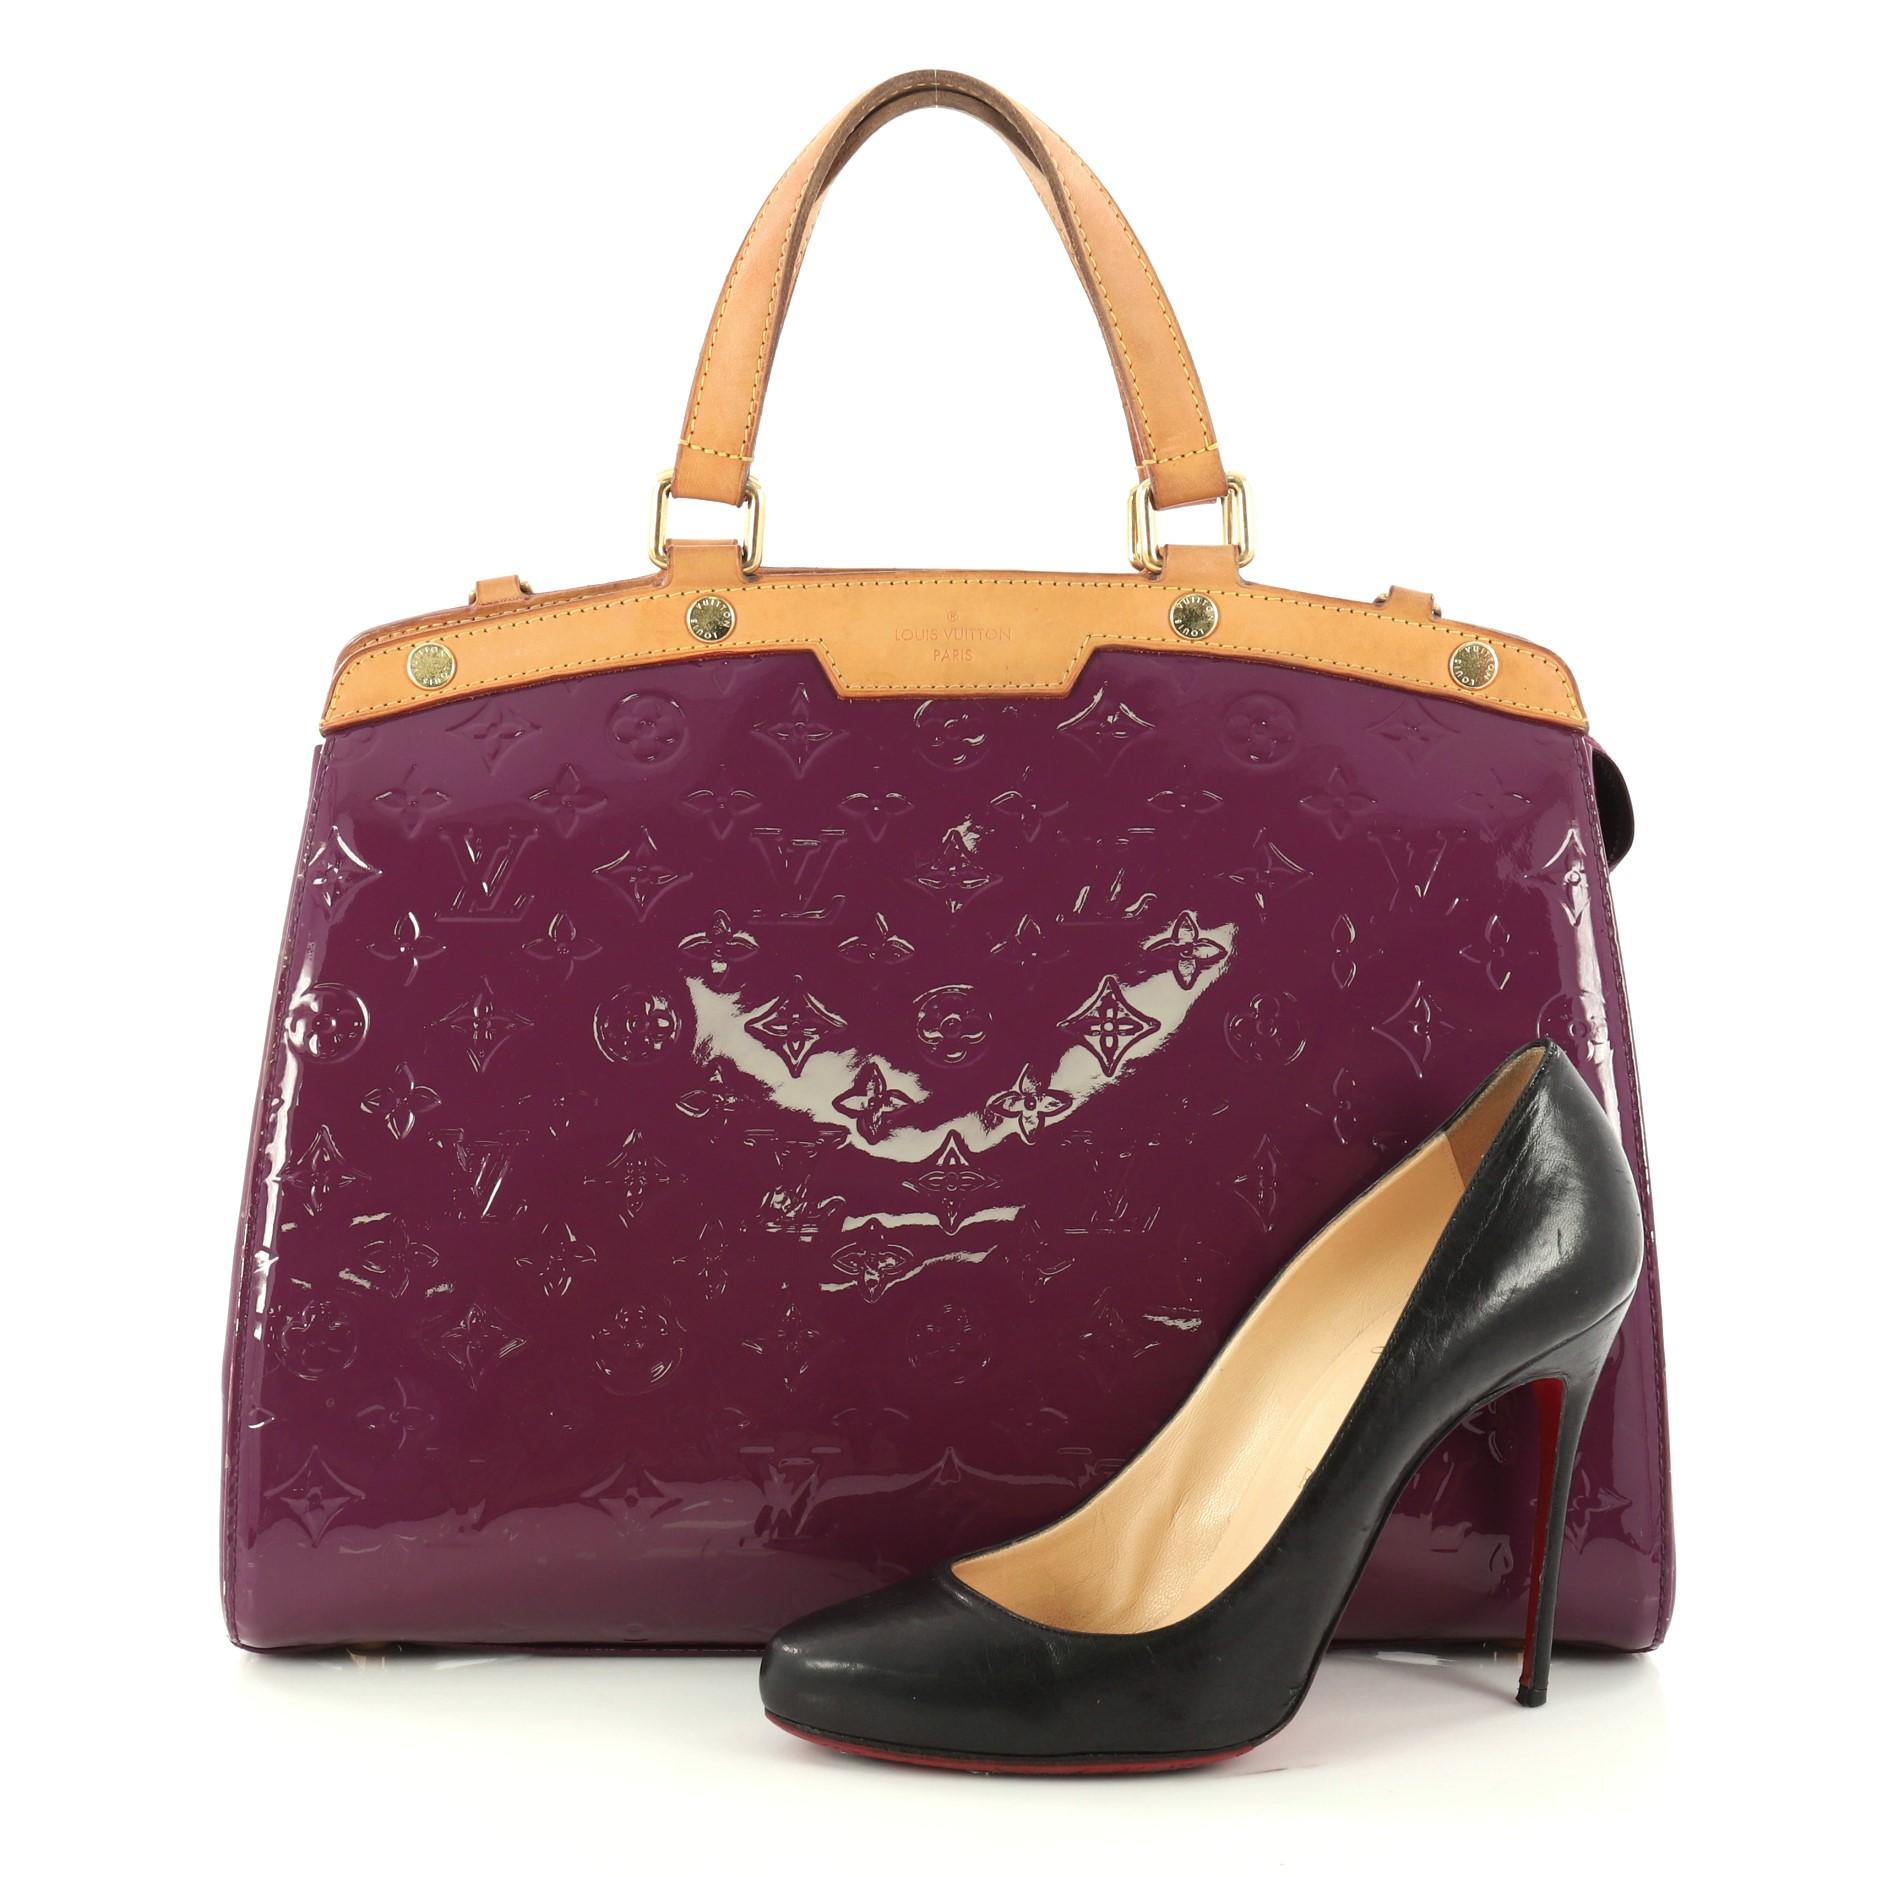 This authentic Louis Vuitton Brea Handbag Monogram Vernis GM is a staple for an everyday casual look. Crafted in purple monogram vernis leather with cowhide leather trims, this structured yet feminine tote features dual flat handles, protective base